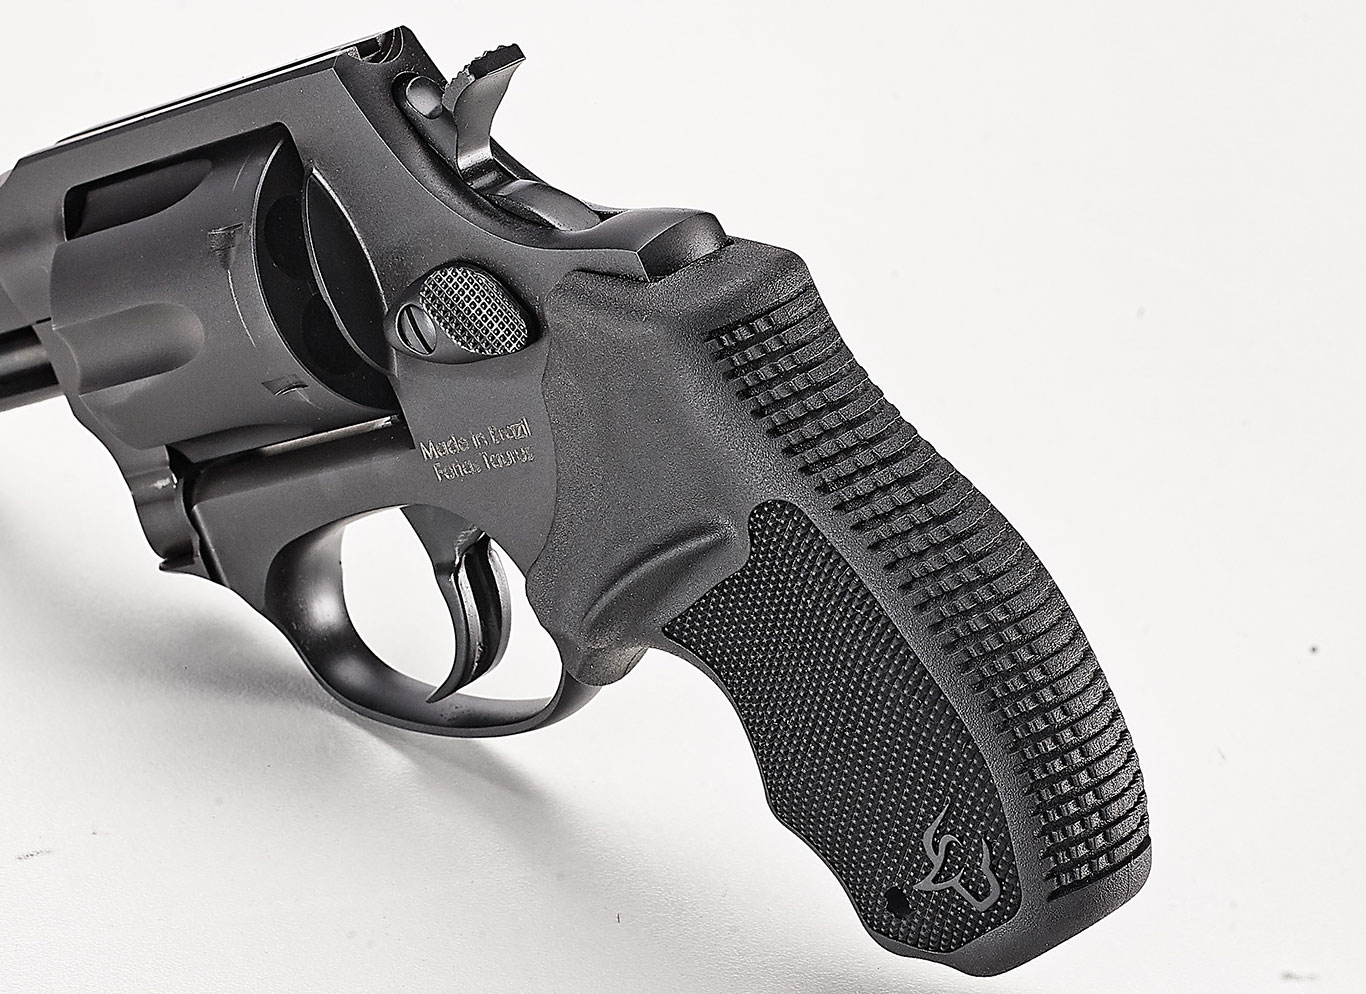 Taurus 856 38 Special Revolver Review